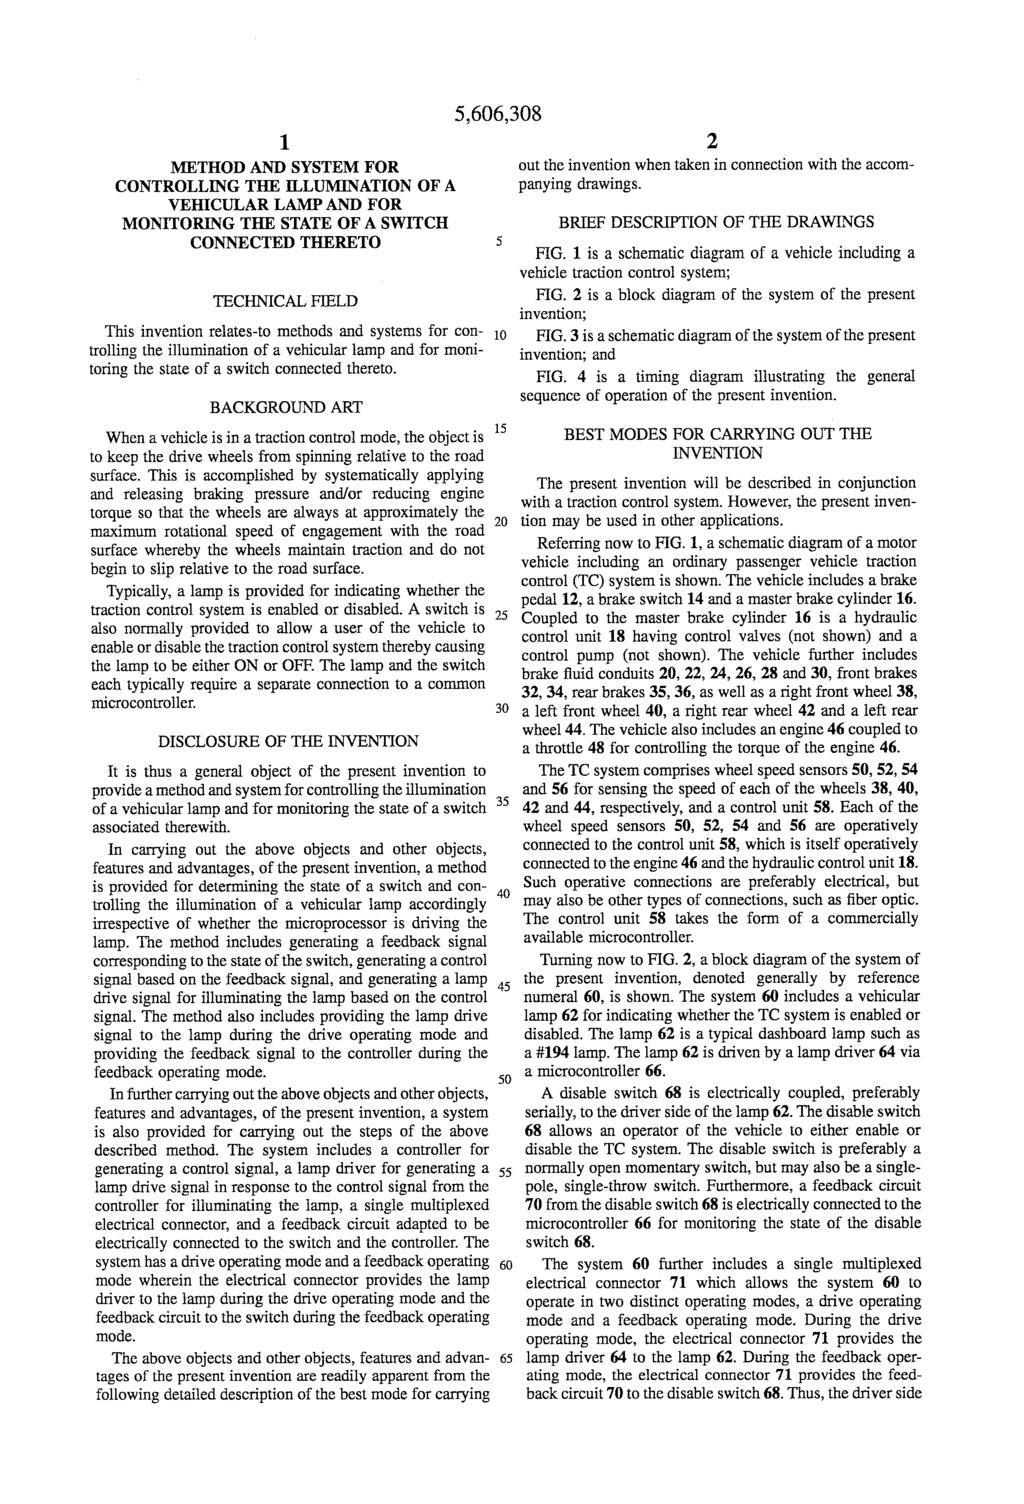 1. METHOD AND SYSTEM FOR CONTROLLING THE LLUMINATION OF A VEHICULAR LAMP AND FOR MONITORING THE STATE OF A SWITCH CONNECTED THERETO TECHNICAL FIELD This invention relates-to methods and systems for